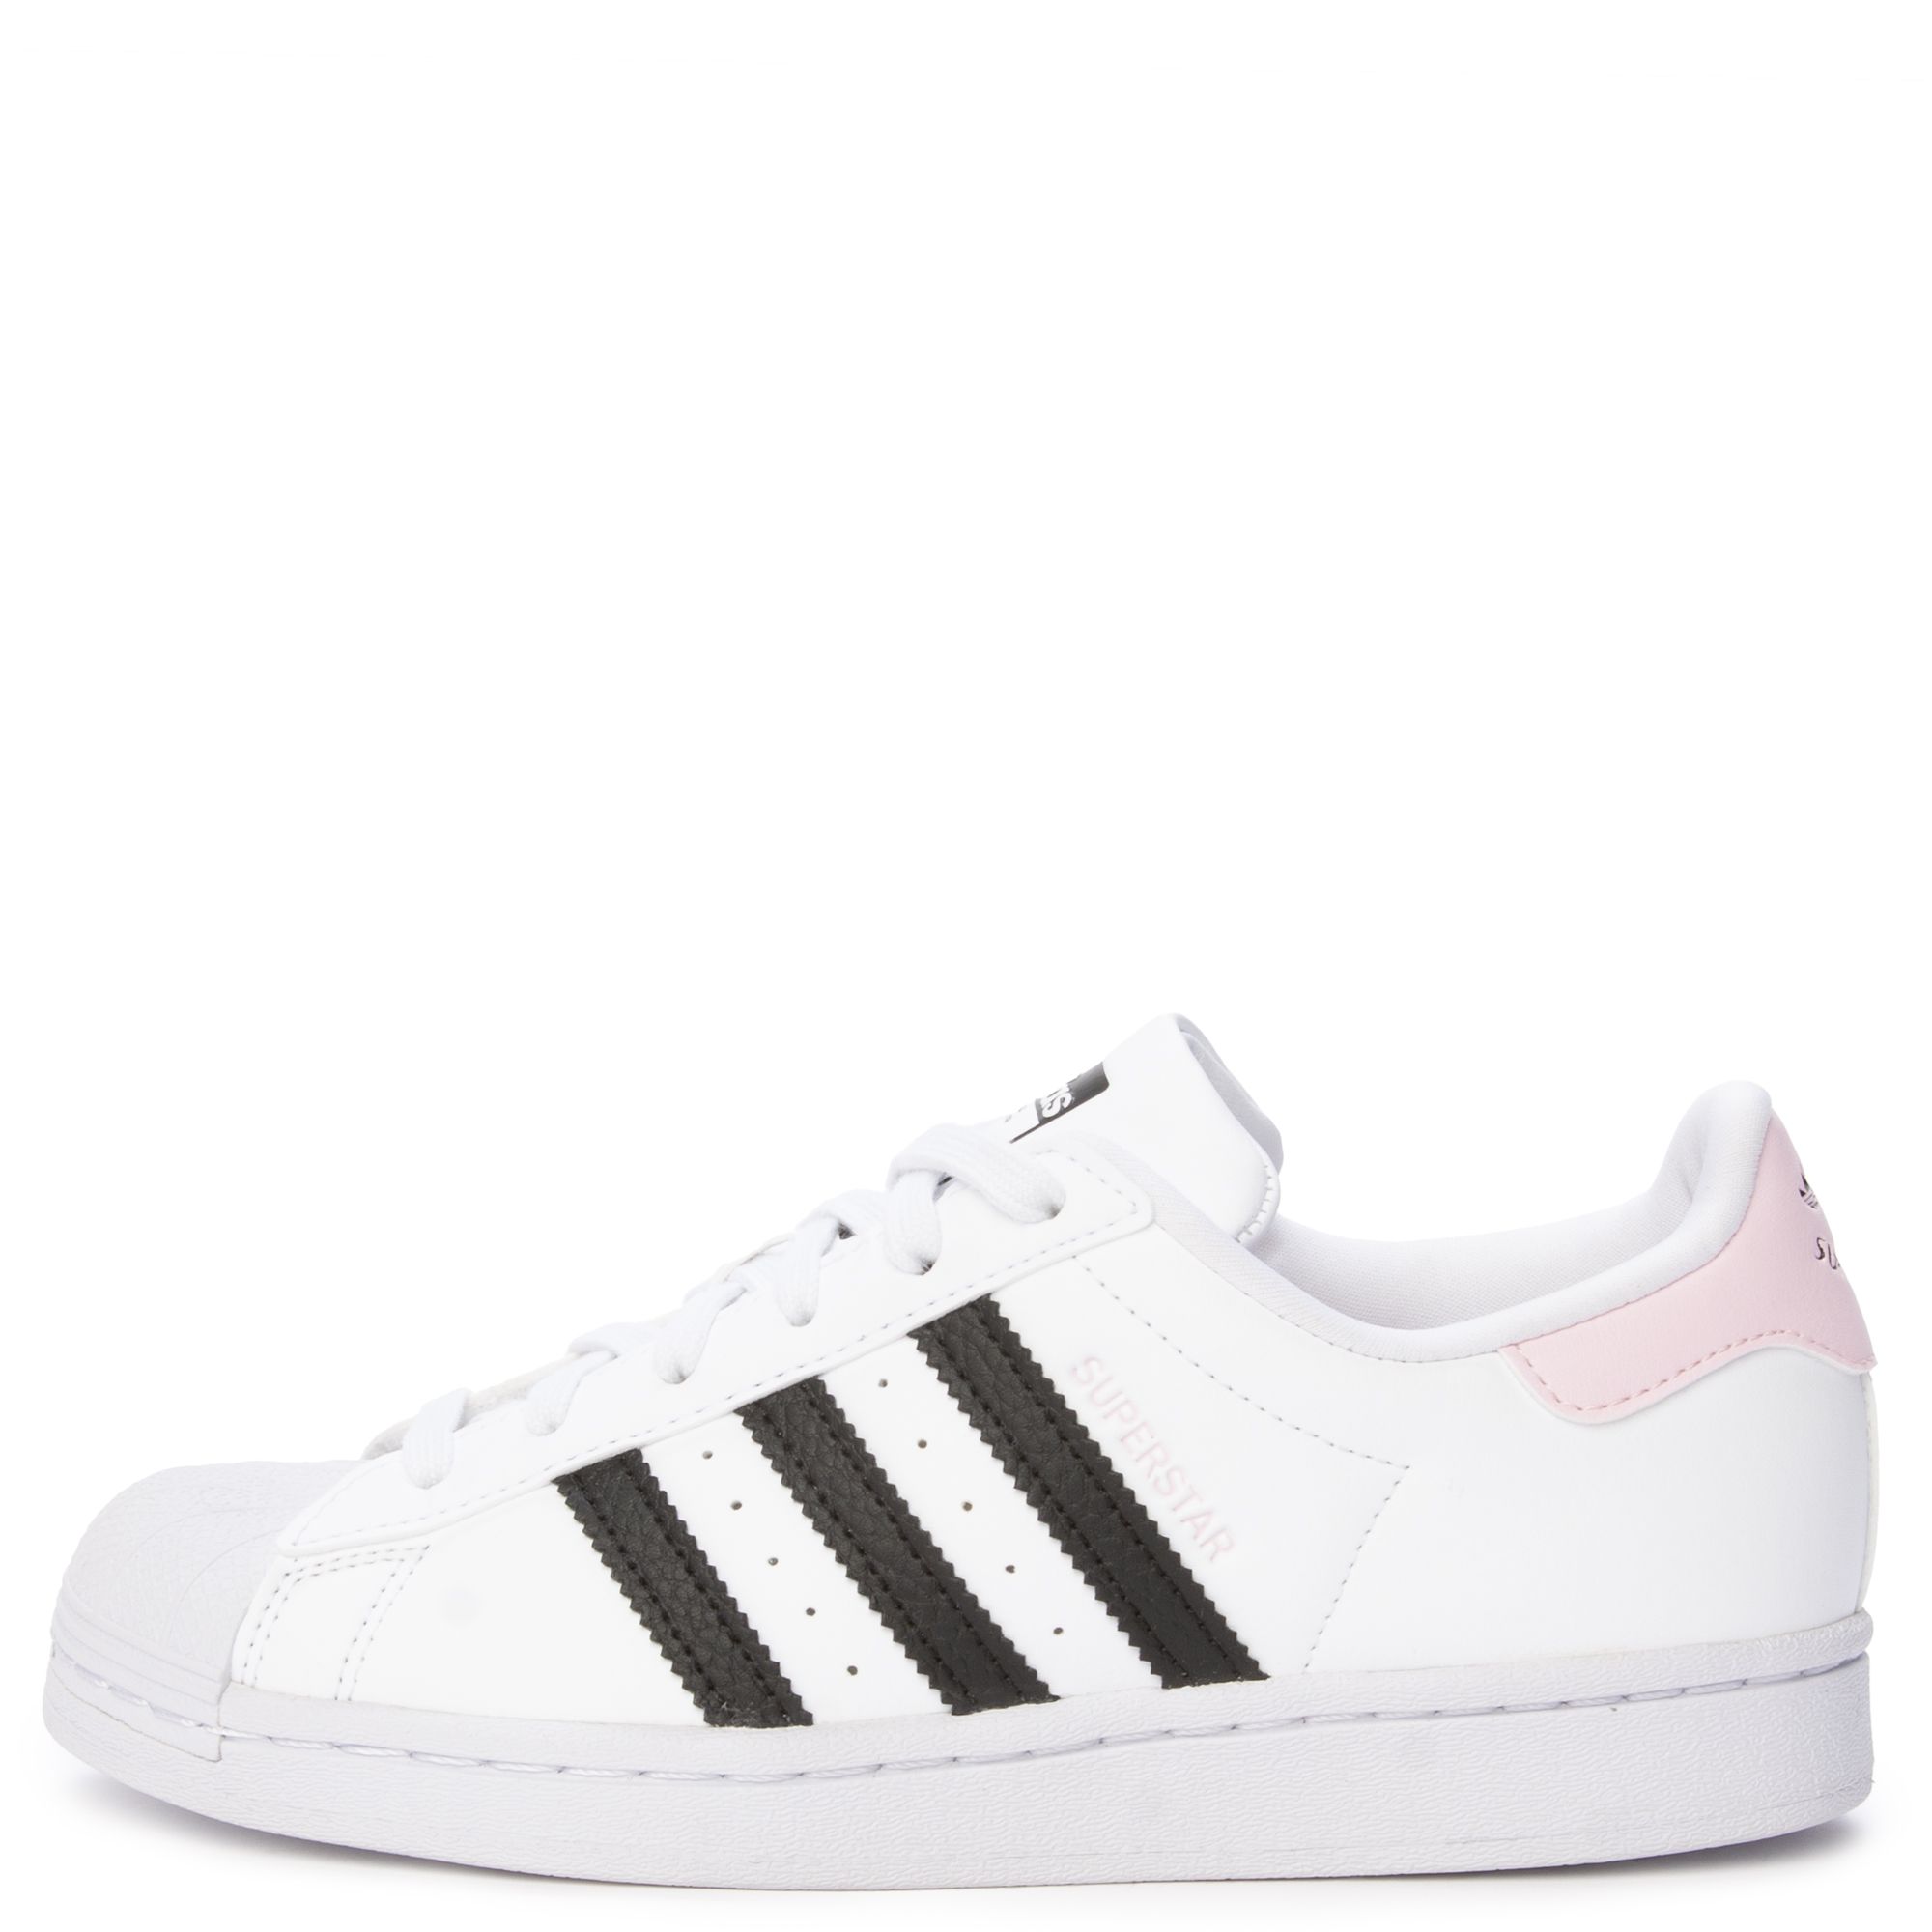 ADIDAS (GS) Superstar Shoes GY9320 -